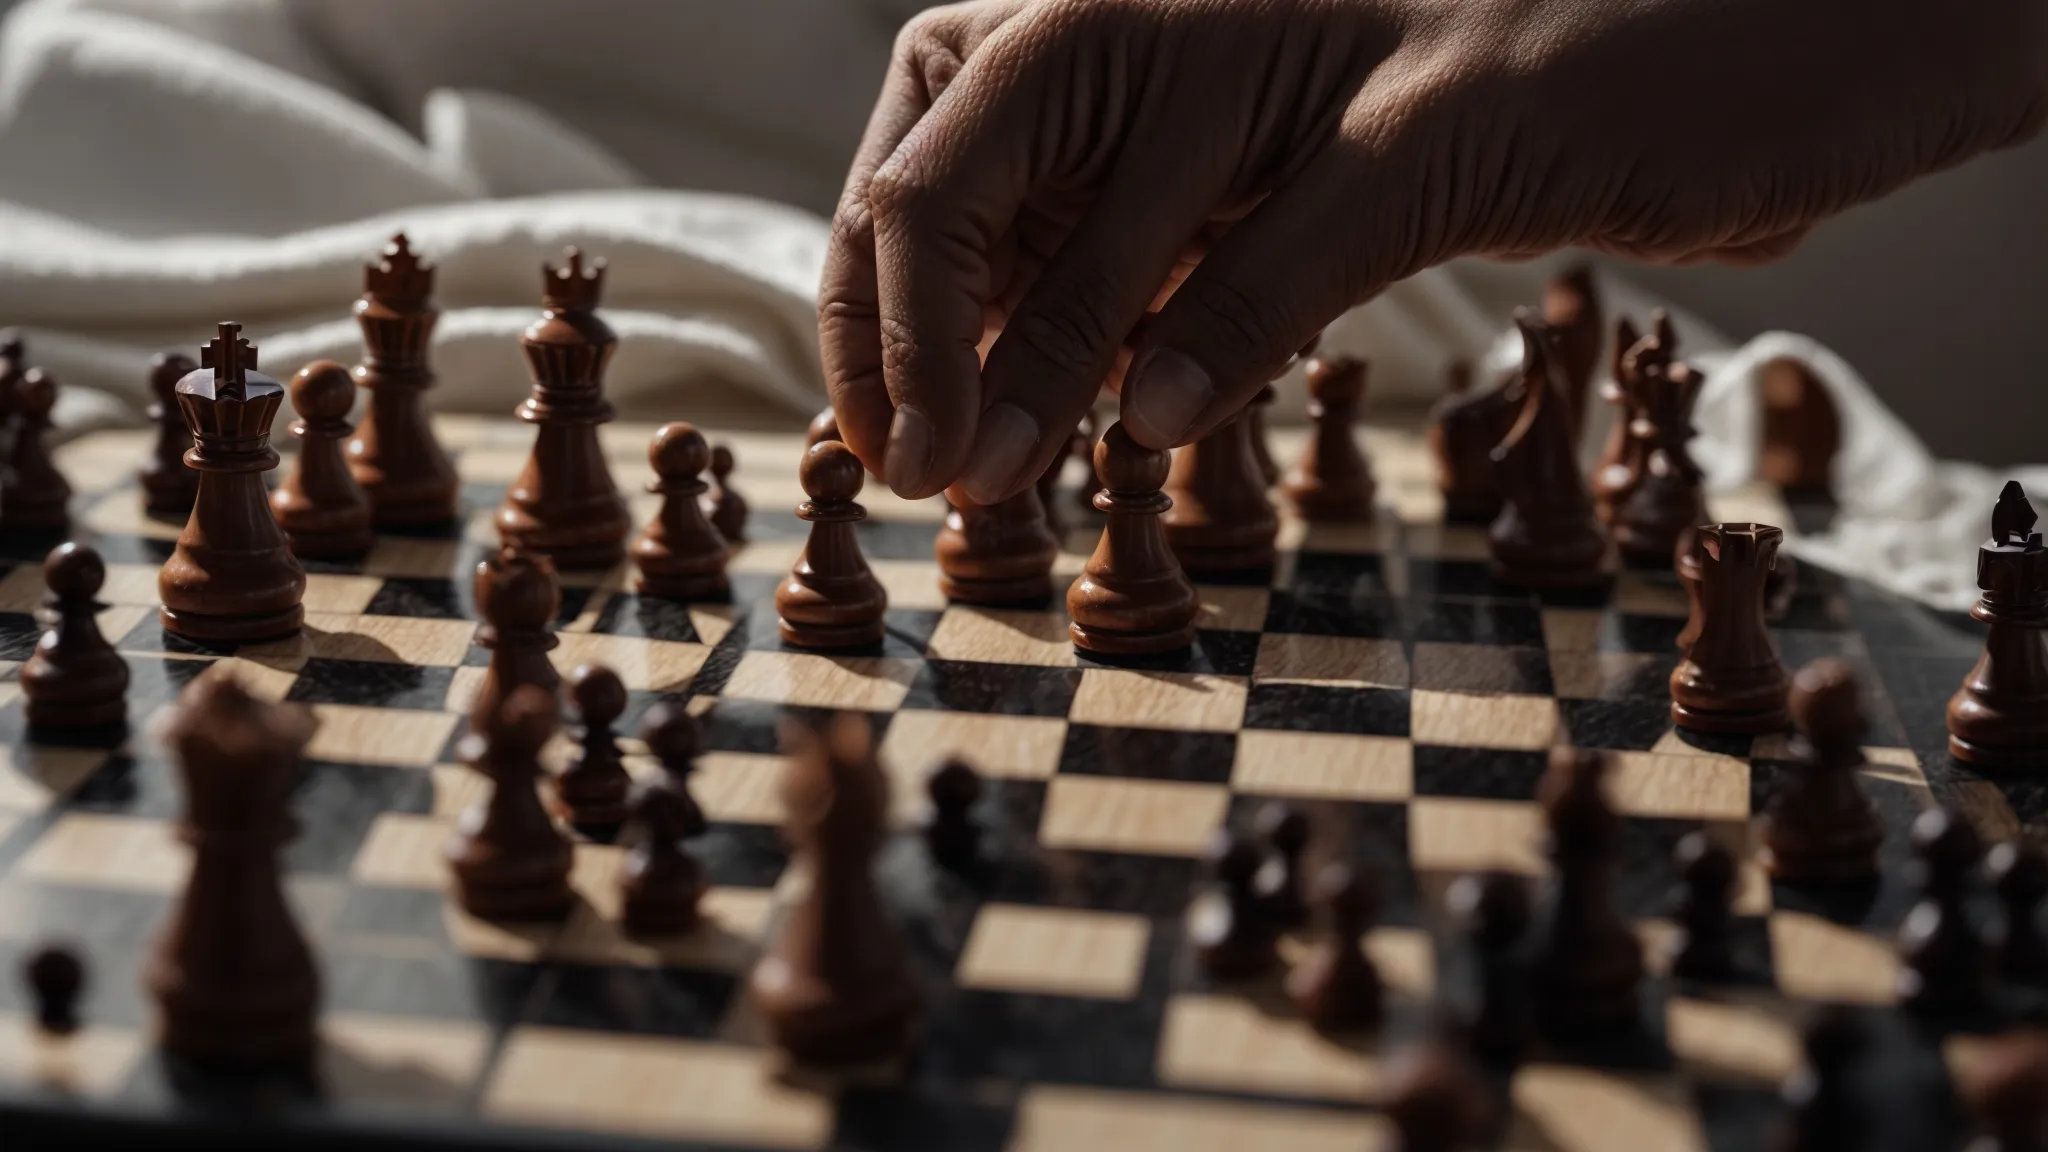 a person thoughtfully arranges chess pieces on a board, symbolizing the strategic placement of keywords in content creation.